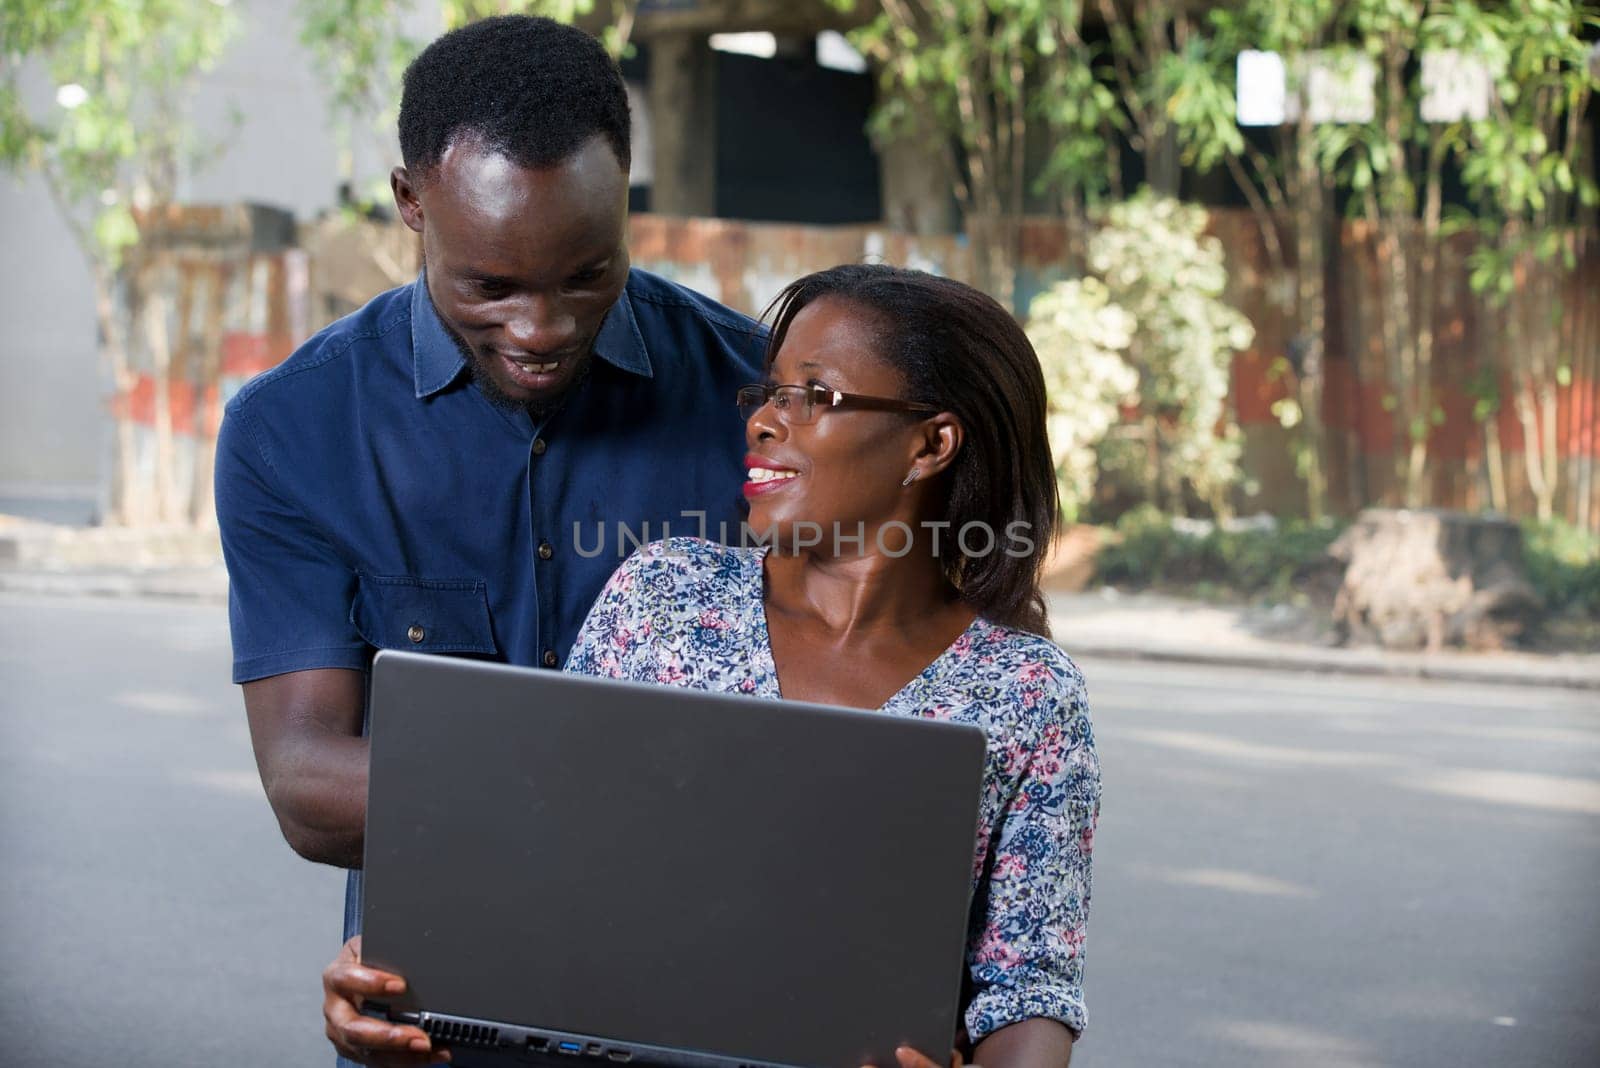 young woman sitting with laptop watching her boyfriend while he looks at the laptop smiling.